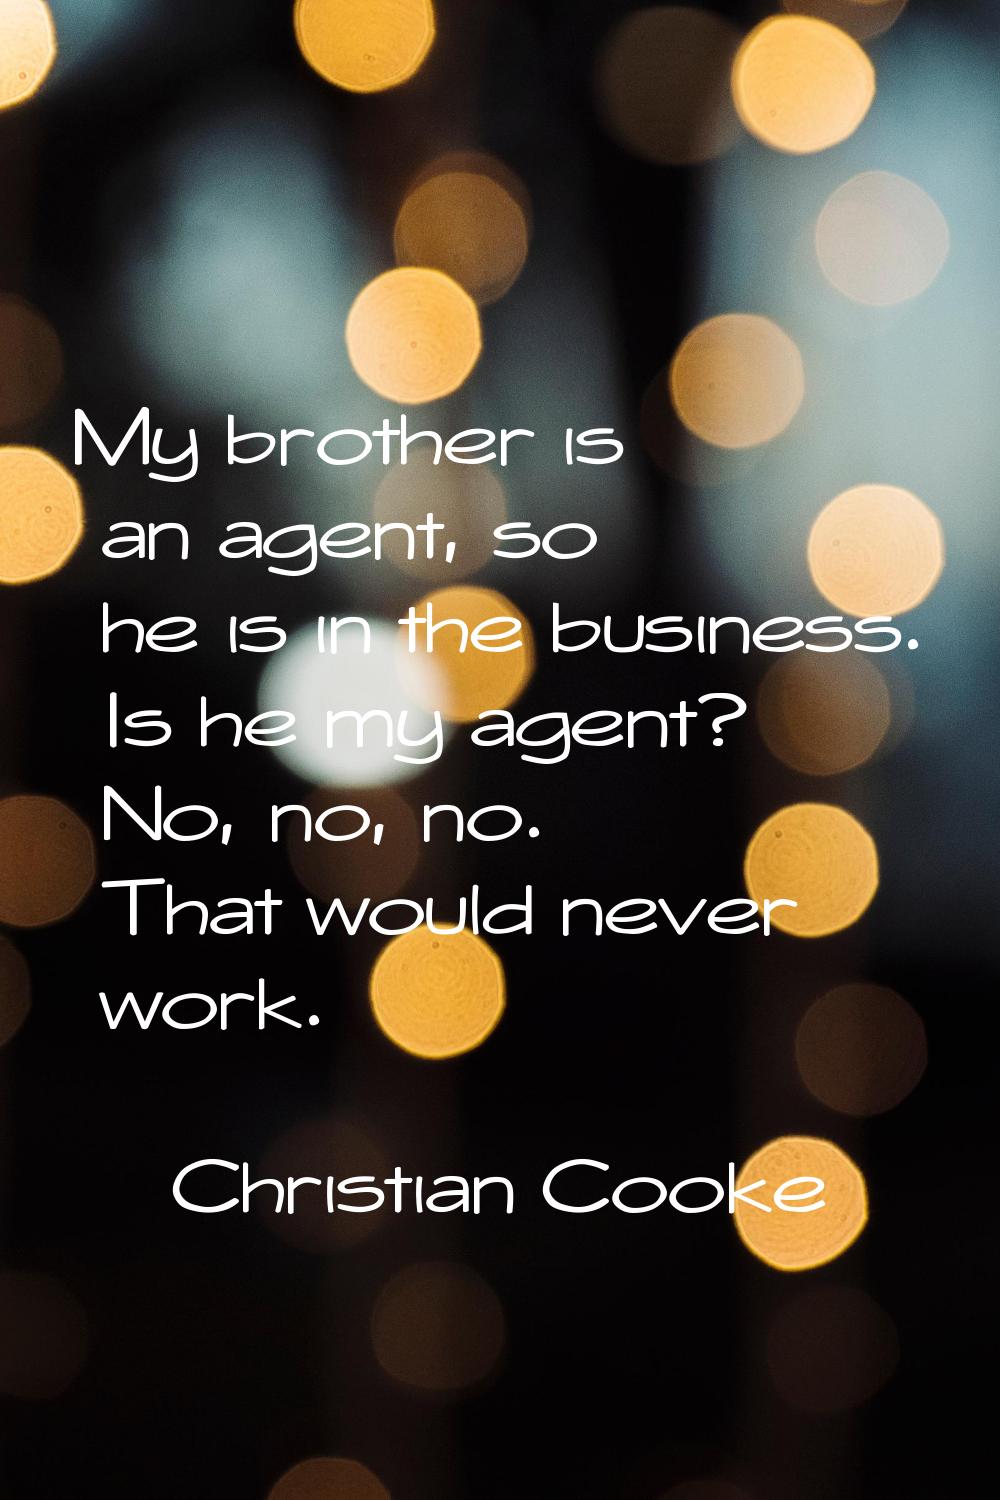 My brother is an agent, so he is in the business. Is he my agent? No, no, no. That would never work